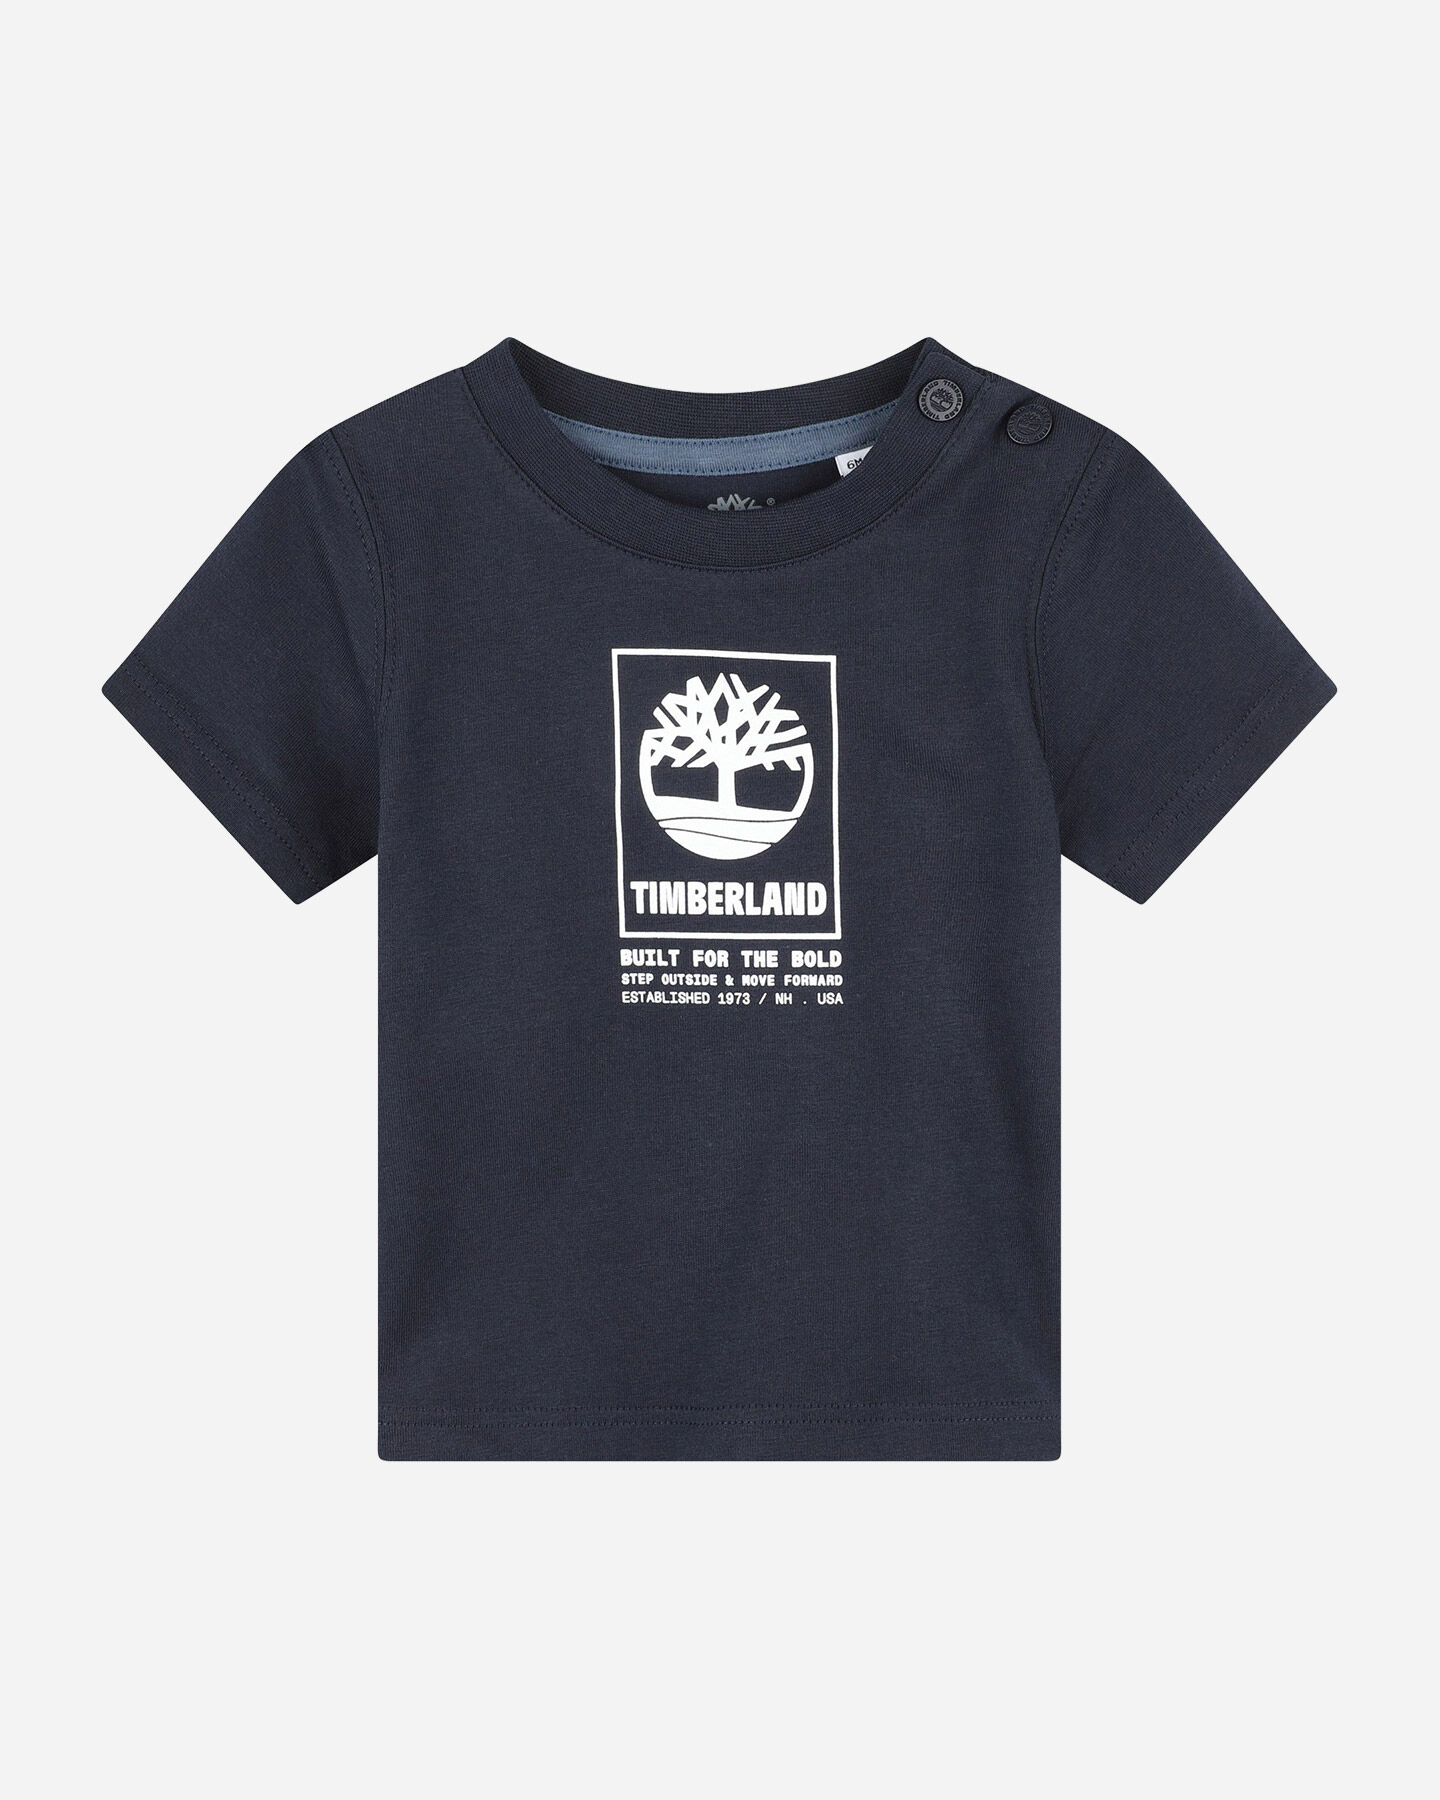  T-Shirt TIMBERLAND LOGO TREE JR S4131421|83D|18M scatto 0